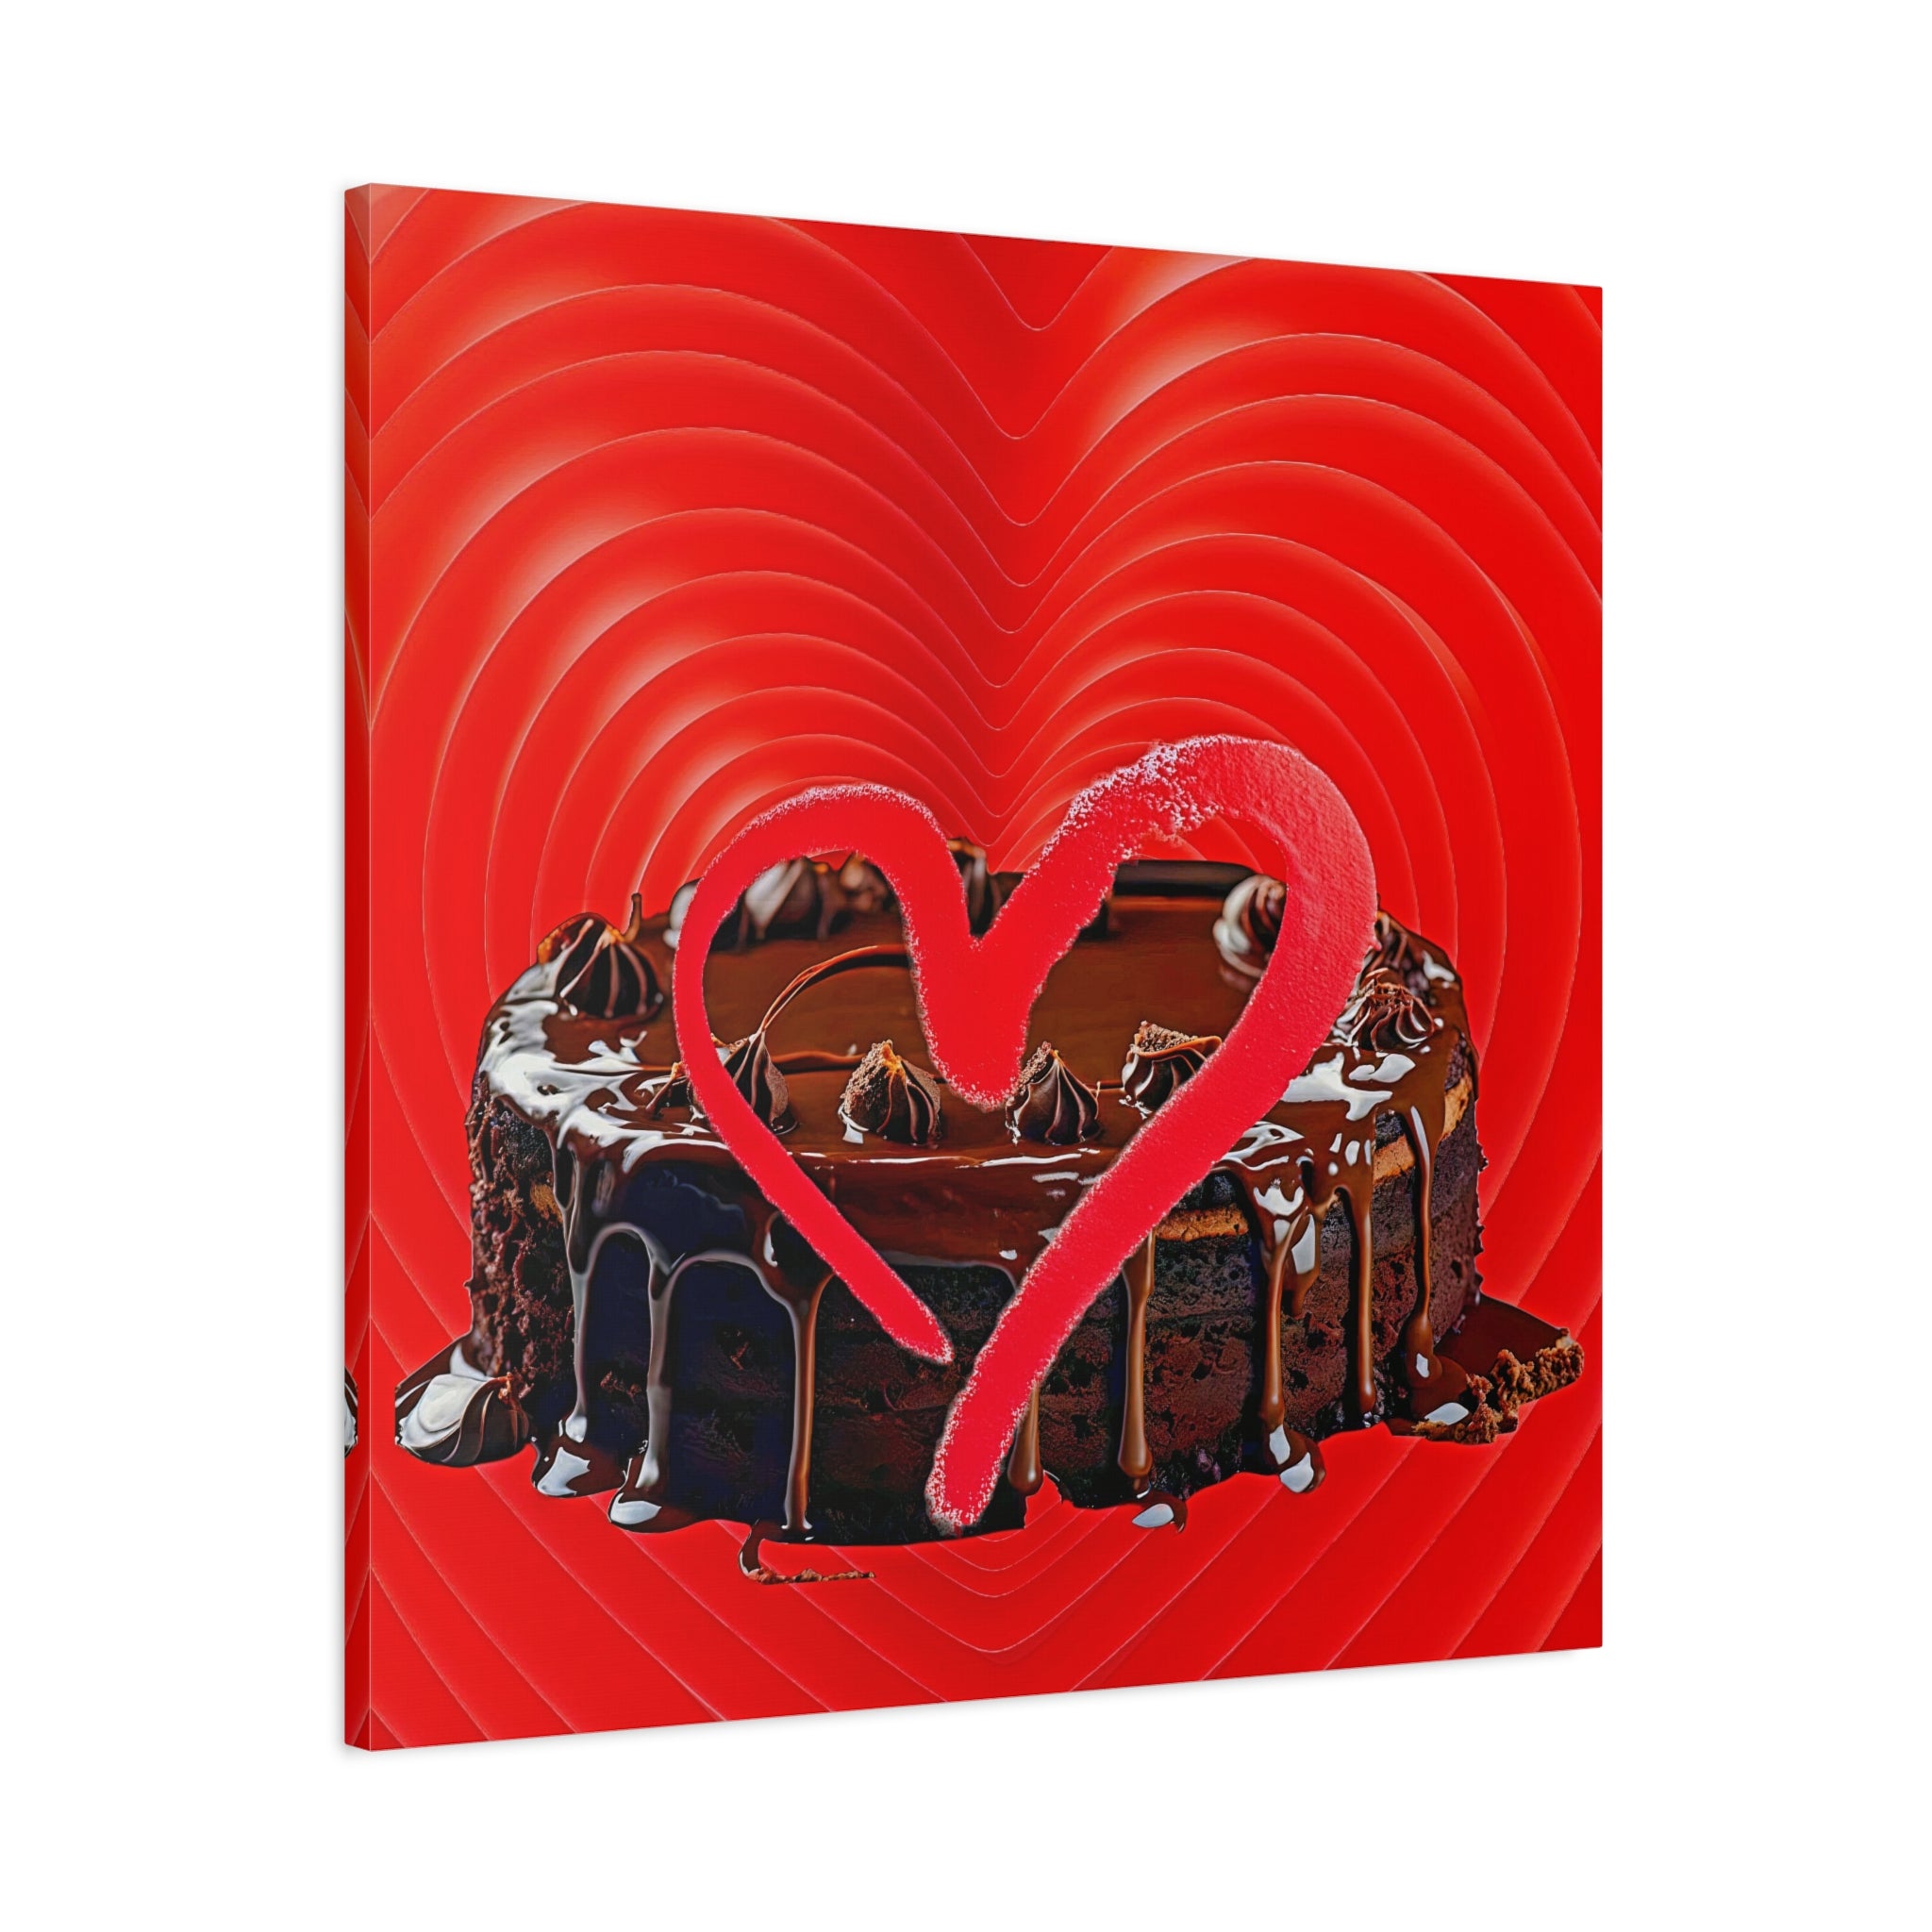 Wall Art LOVE CHOCOLATE CAKE Canvas Print Painting Original Giclee 32X32 GW Love Nice Beauty Fun Design Fit House Home Office Gift Ready Hang Living